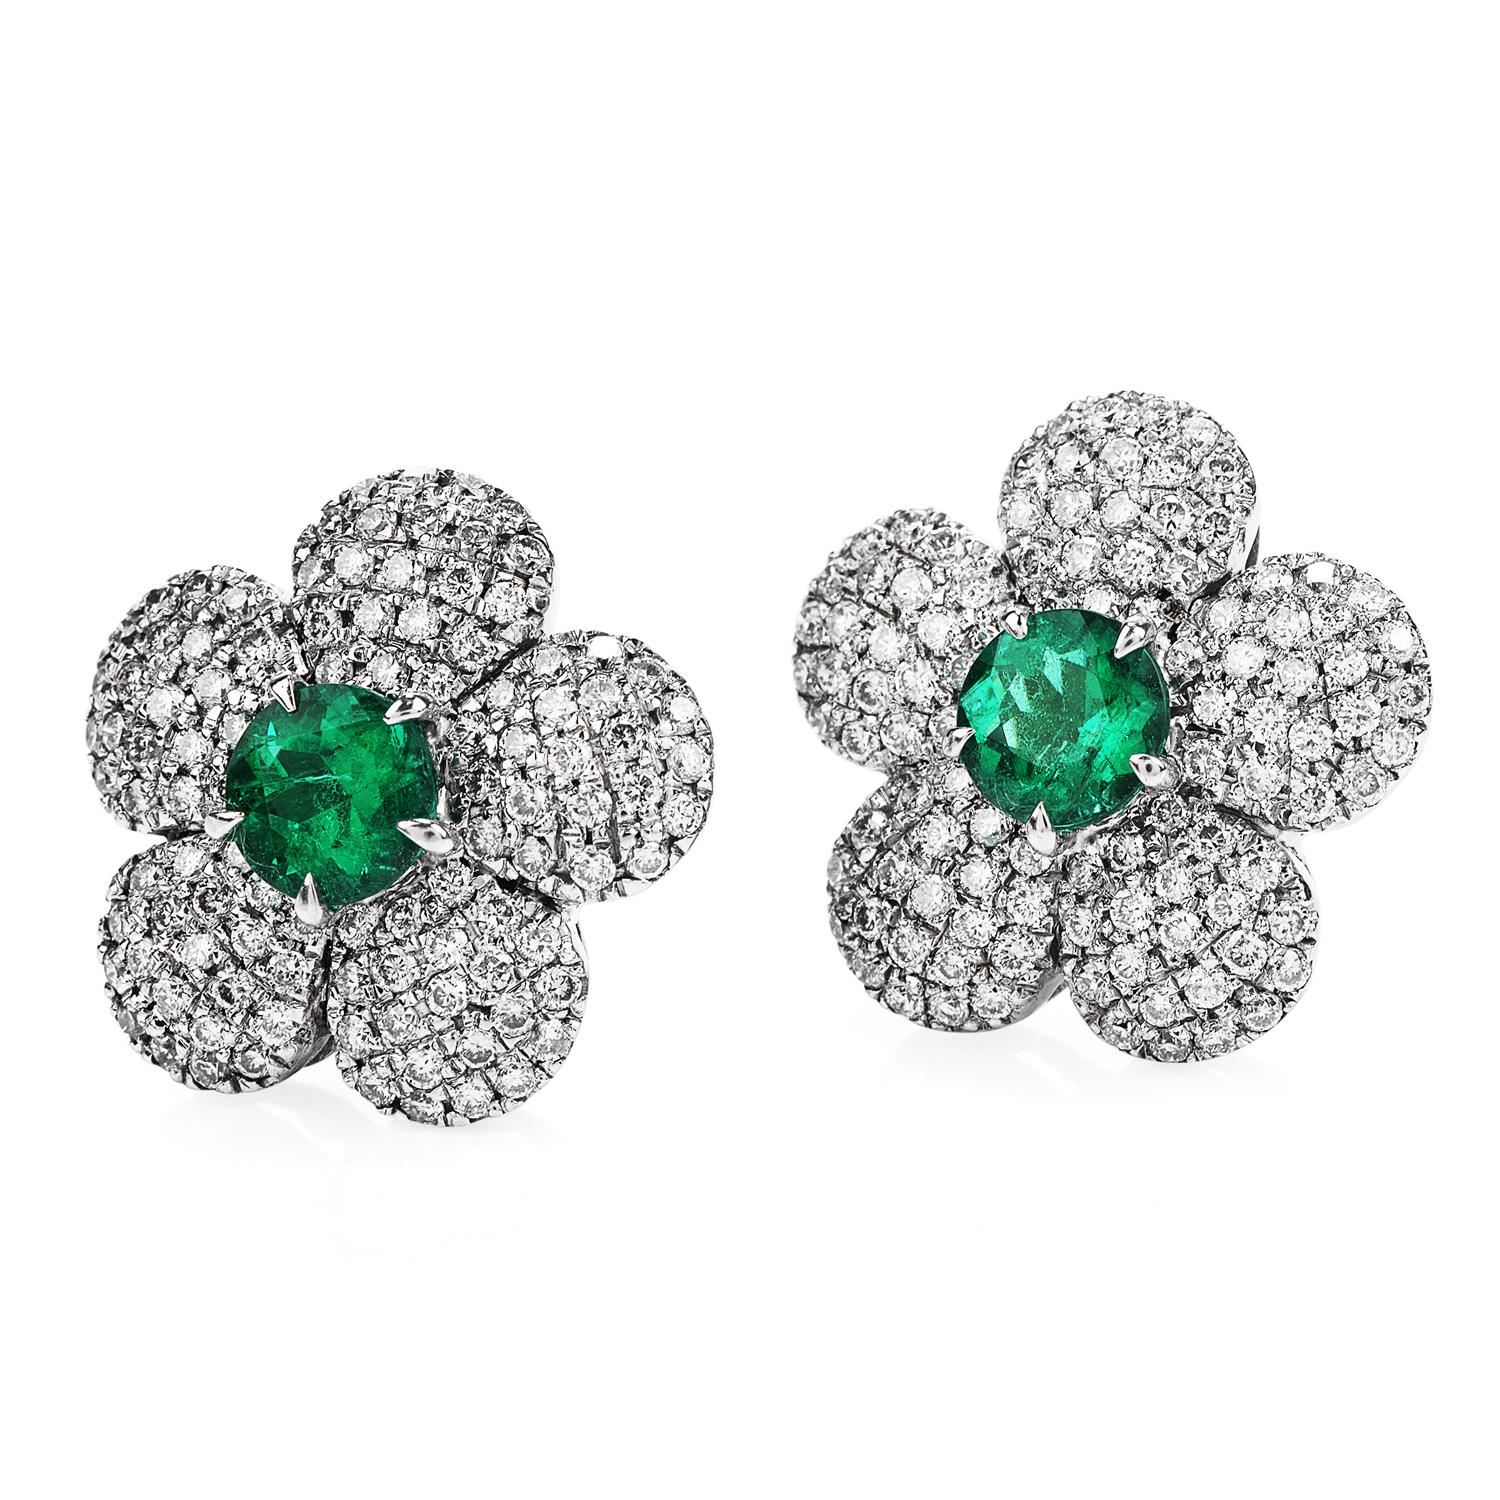 Dress up with these Flower Motif Stud Earrings. Perfect for Spring Time!

Crafted in Solid 18K White Gold, with a Petal Design of Cluster Pave set, Round Cut Diamonds with a total carat weight of 1.50 cts, VS Clarity, H-I Color.  Displaying vivid